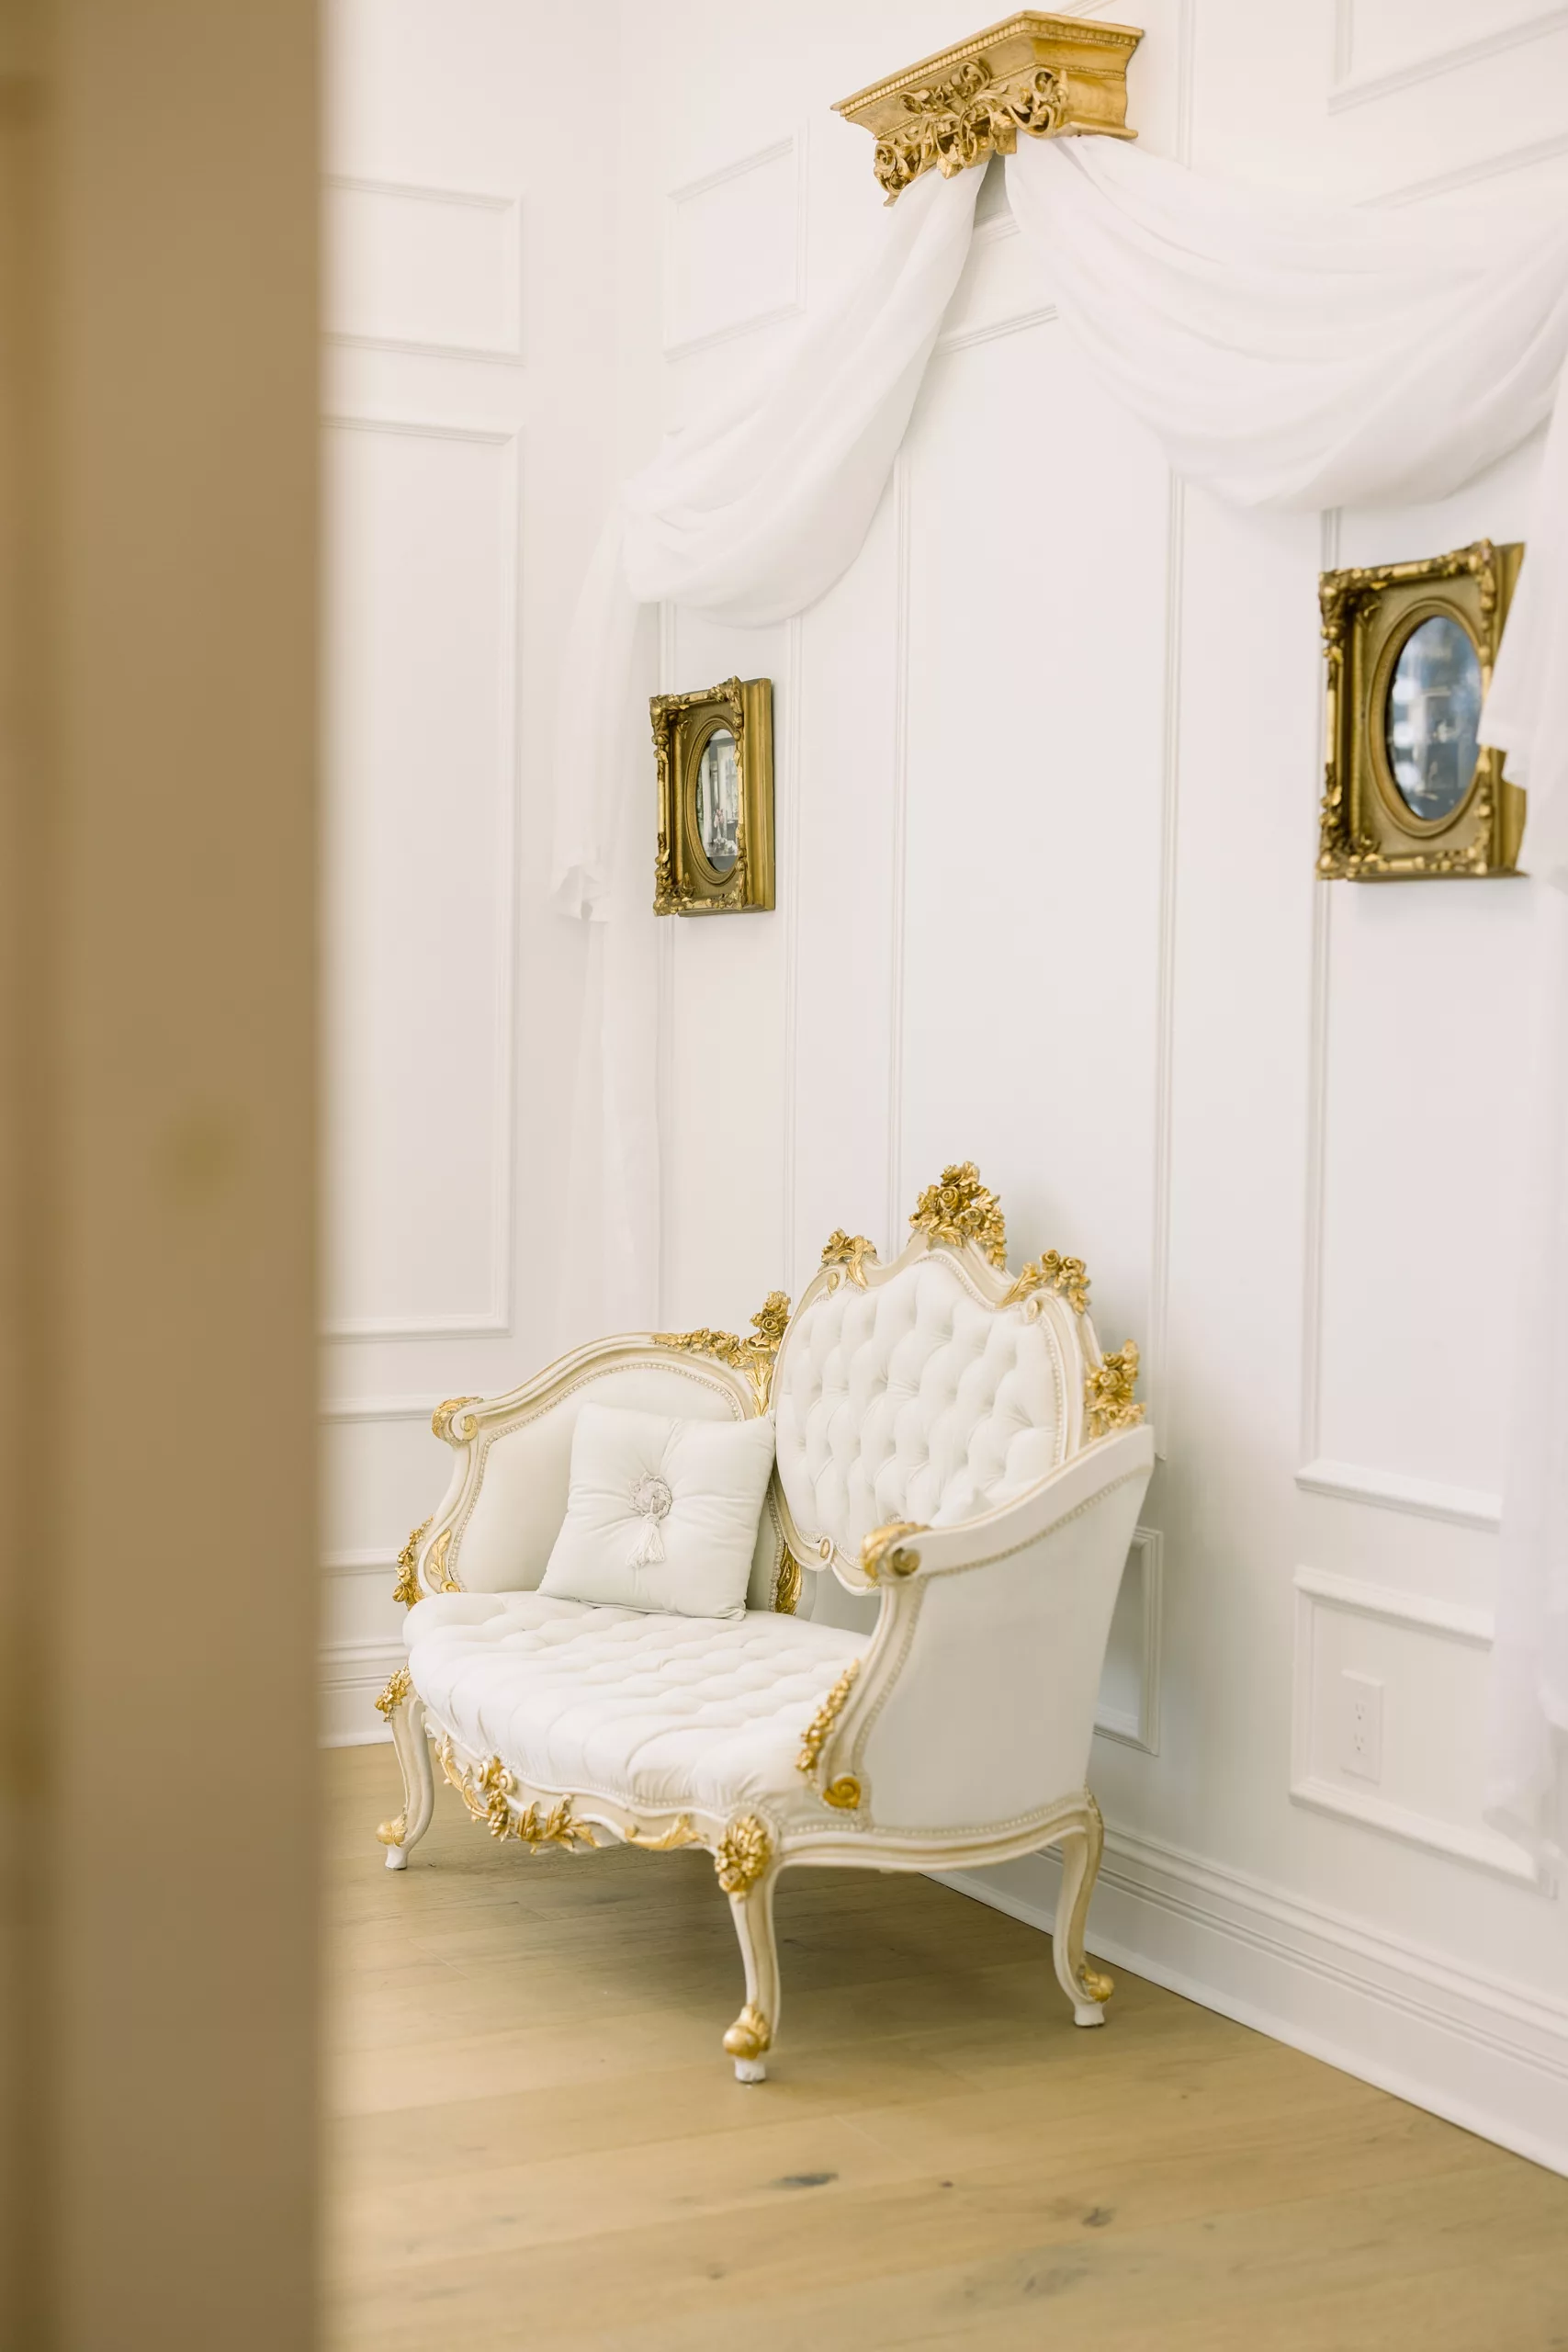 An ornate antique couch sitting under white drapes 